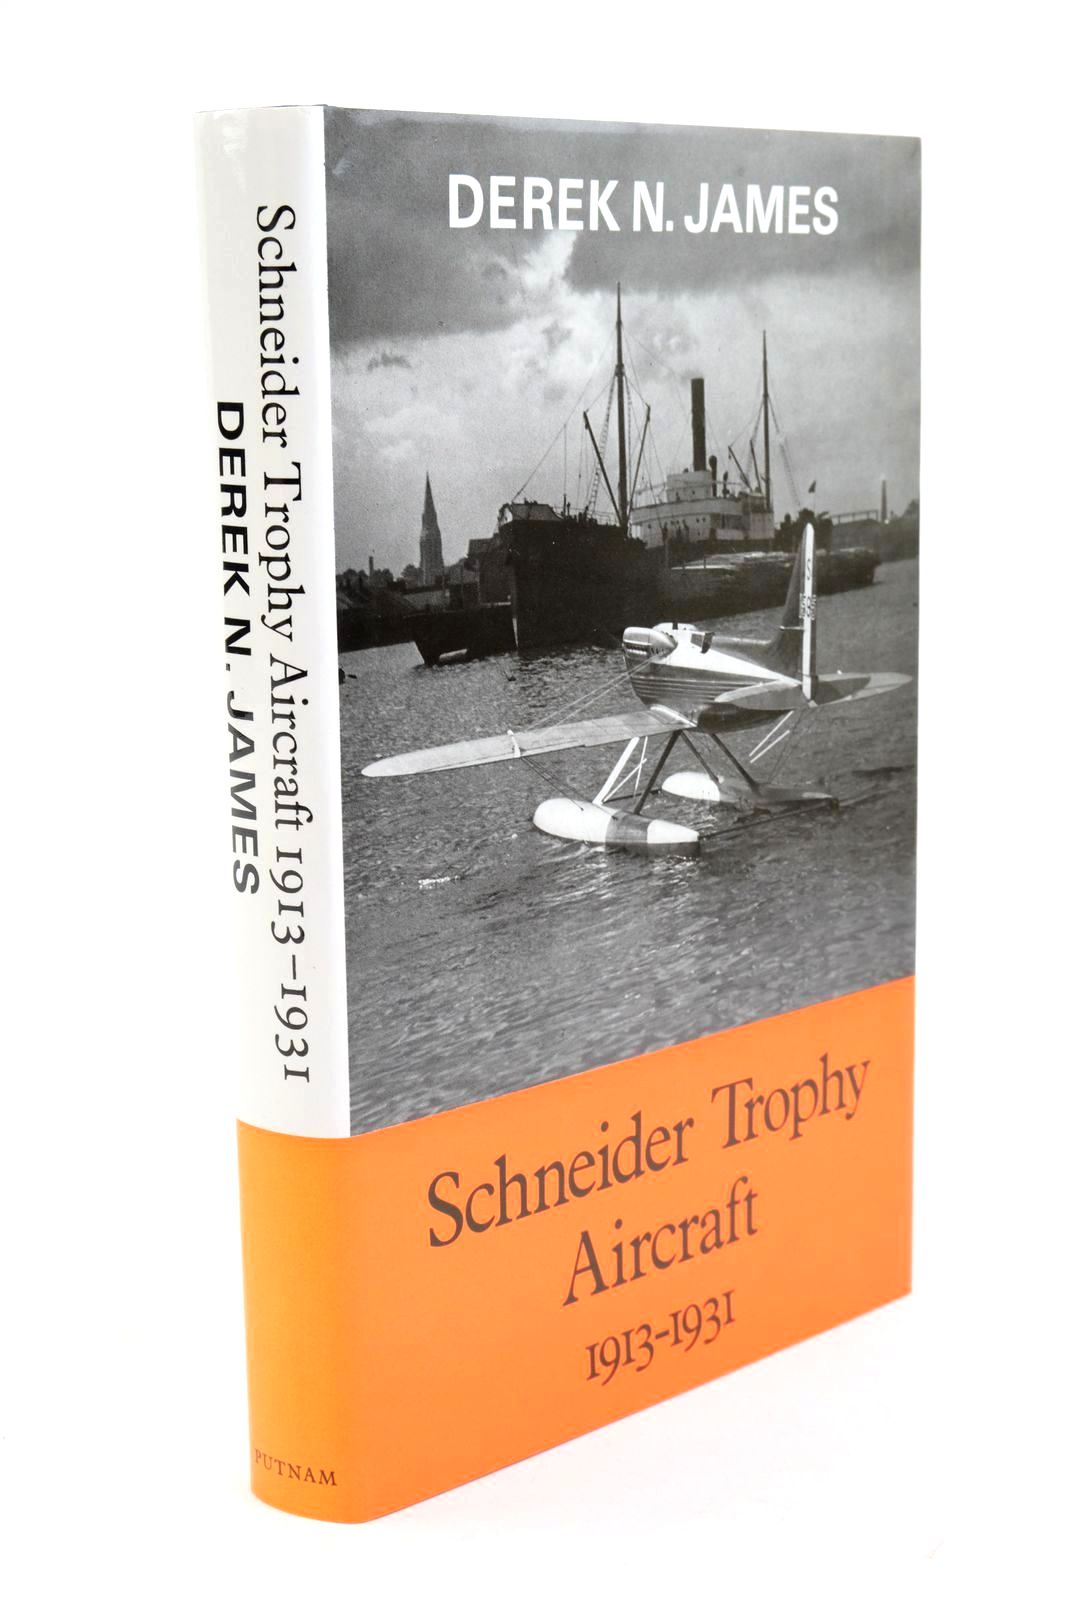 Photo of SCHNEIDER TROPHY AIRCRAFT 1913-1931 written by James, Derek N. published by Putnam (STOCK CODE: 1322008)  for sale by Stella & Rose's Books